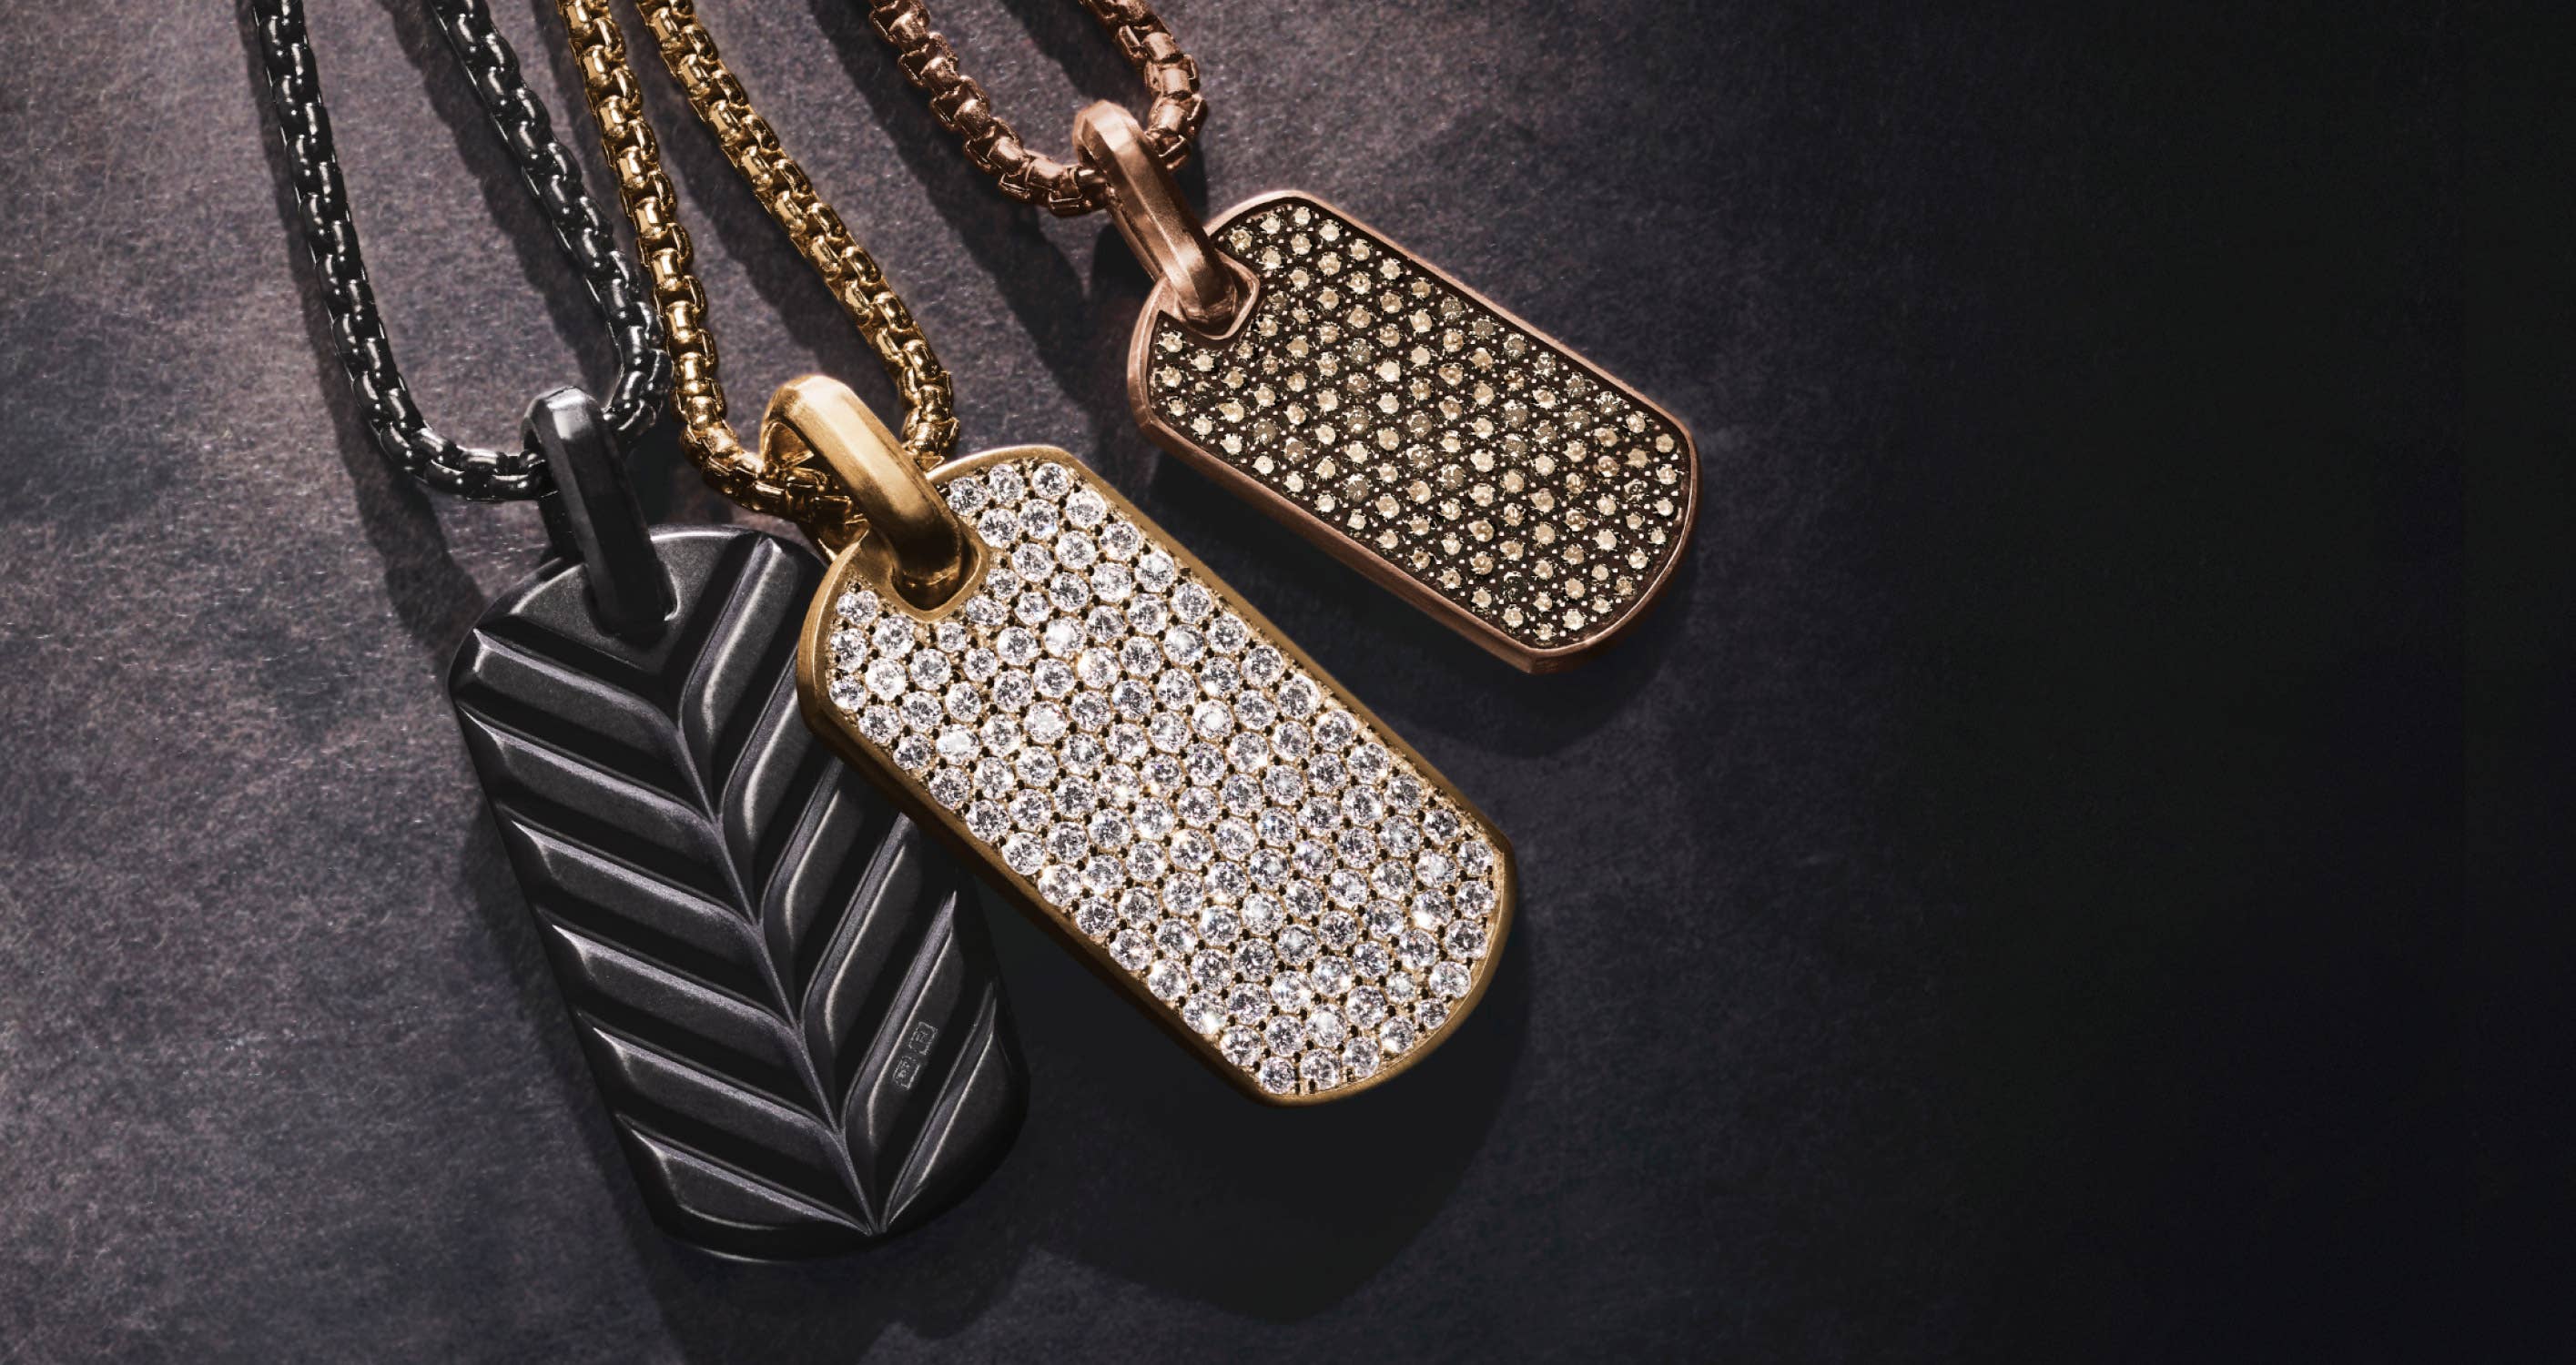 Men's Gift Guide: Three different men's tags, one black, one gold with diamonds and one gold with stones.